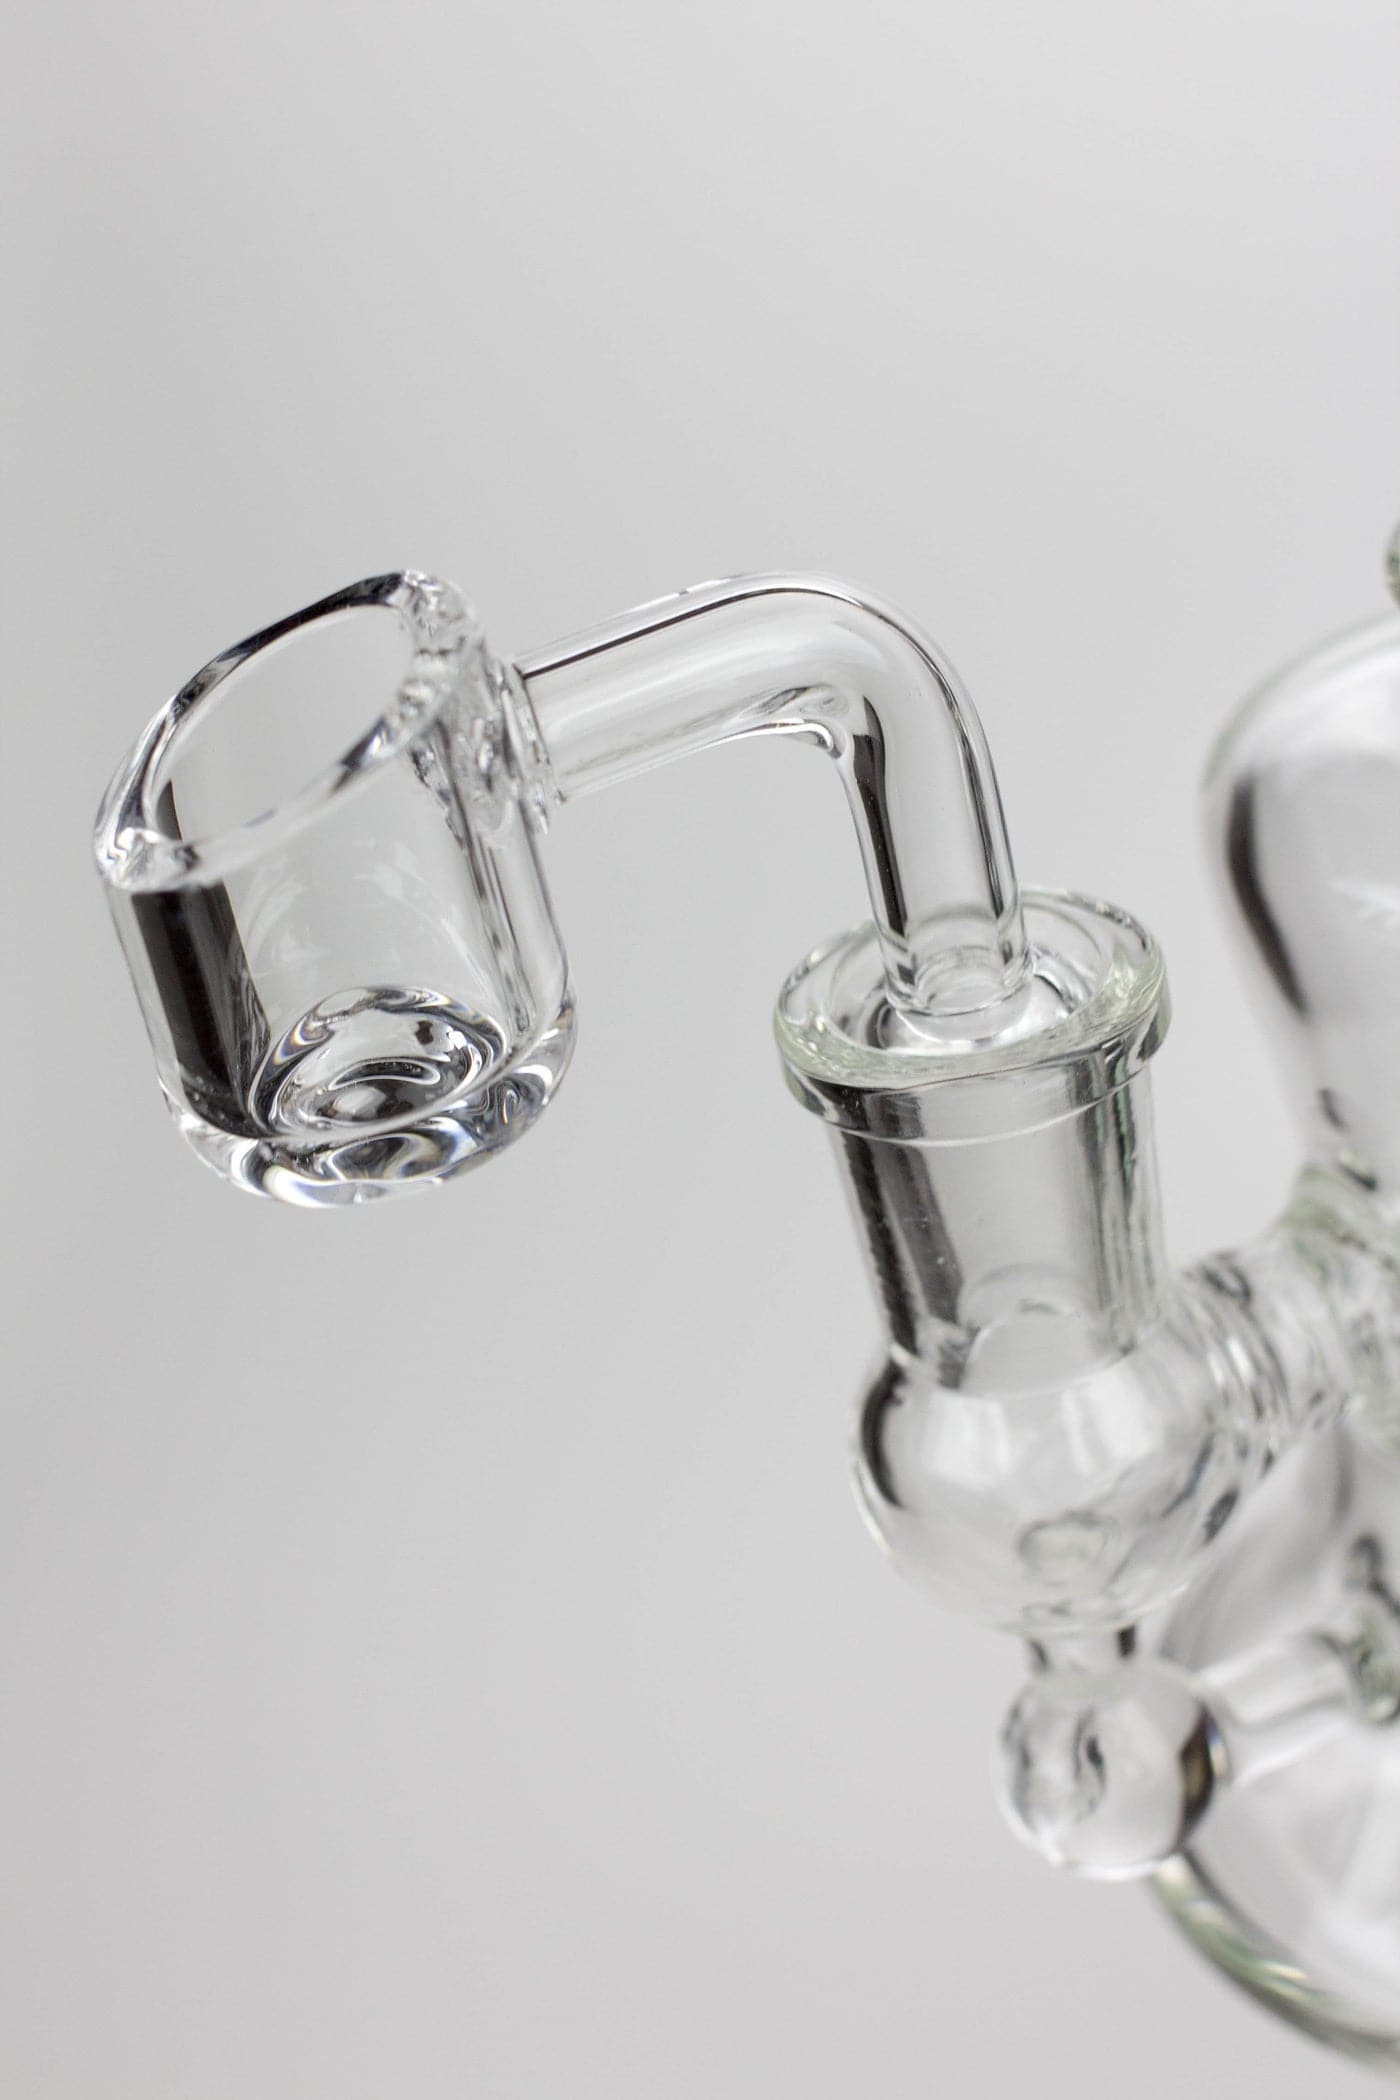 Fixed 3 hole diffuser skirt bubbler_4